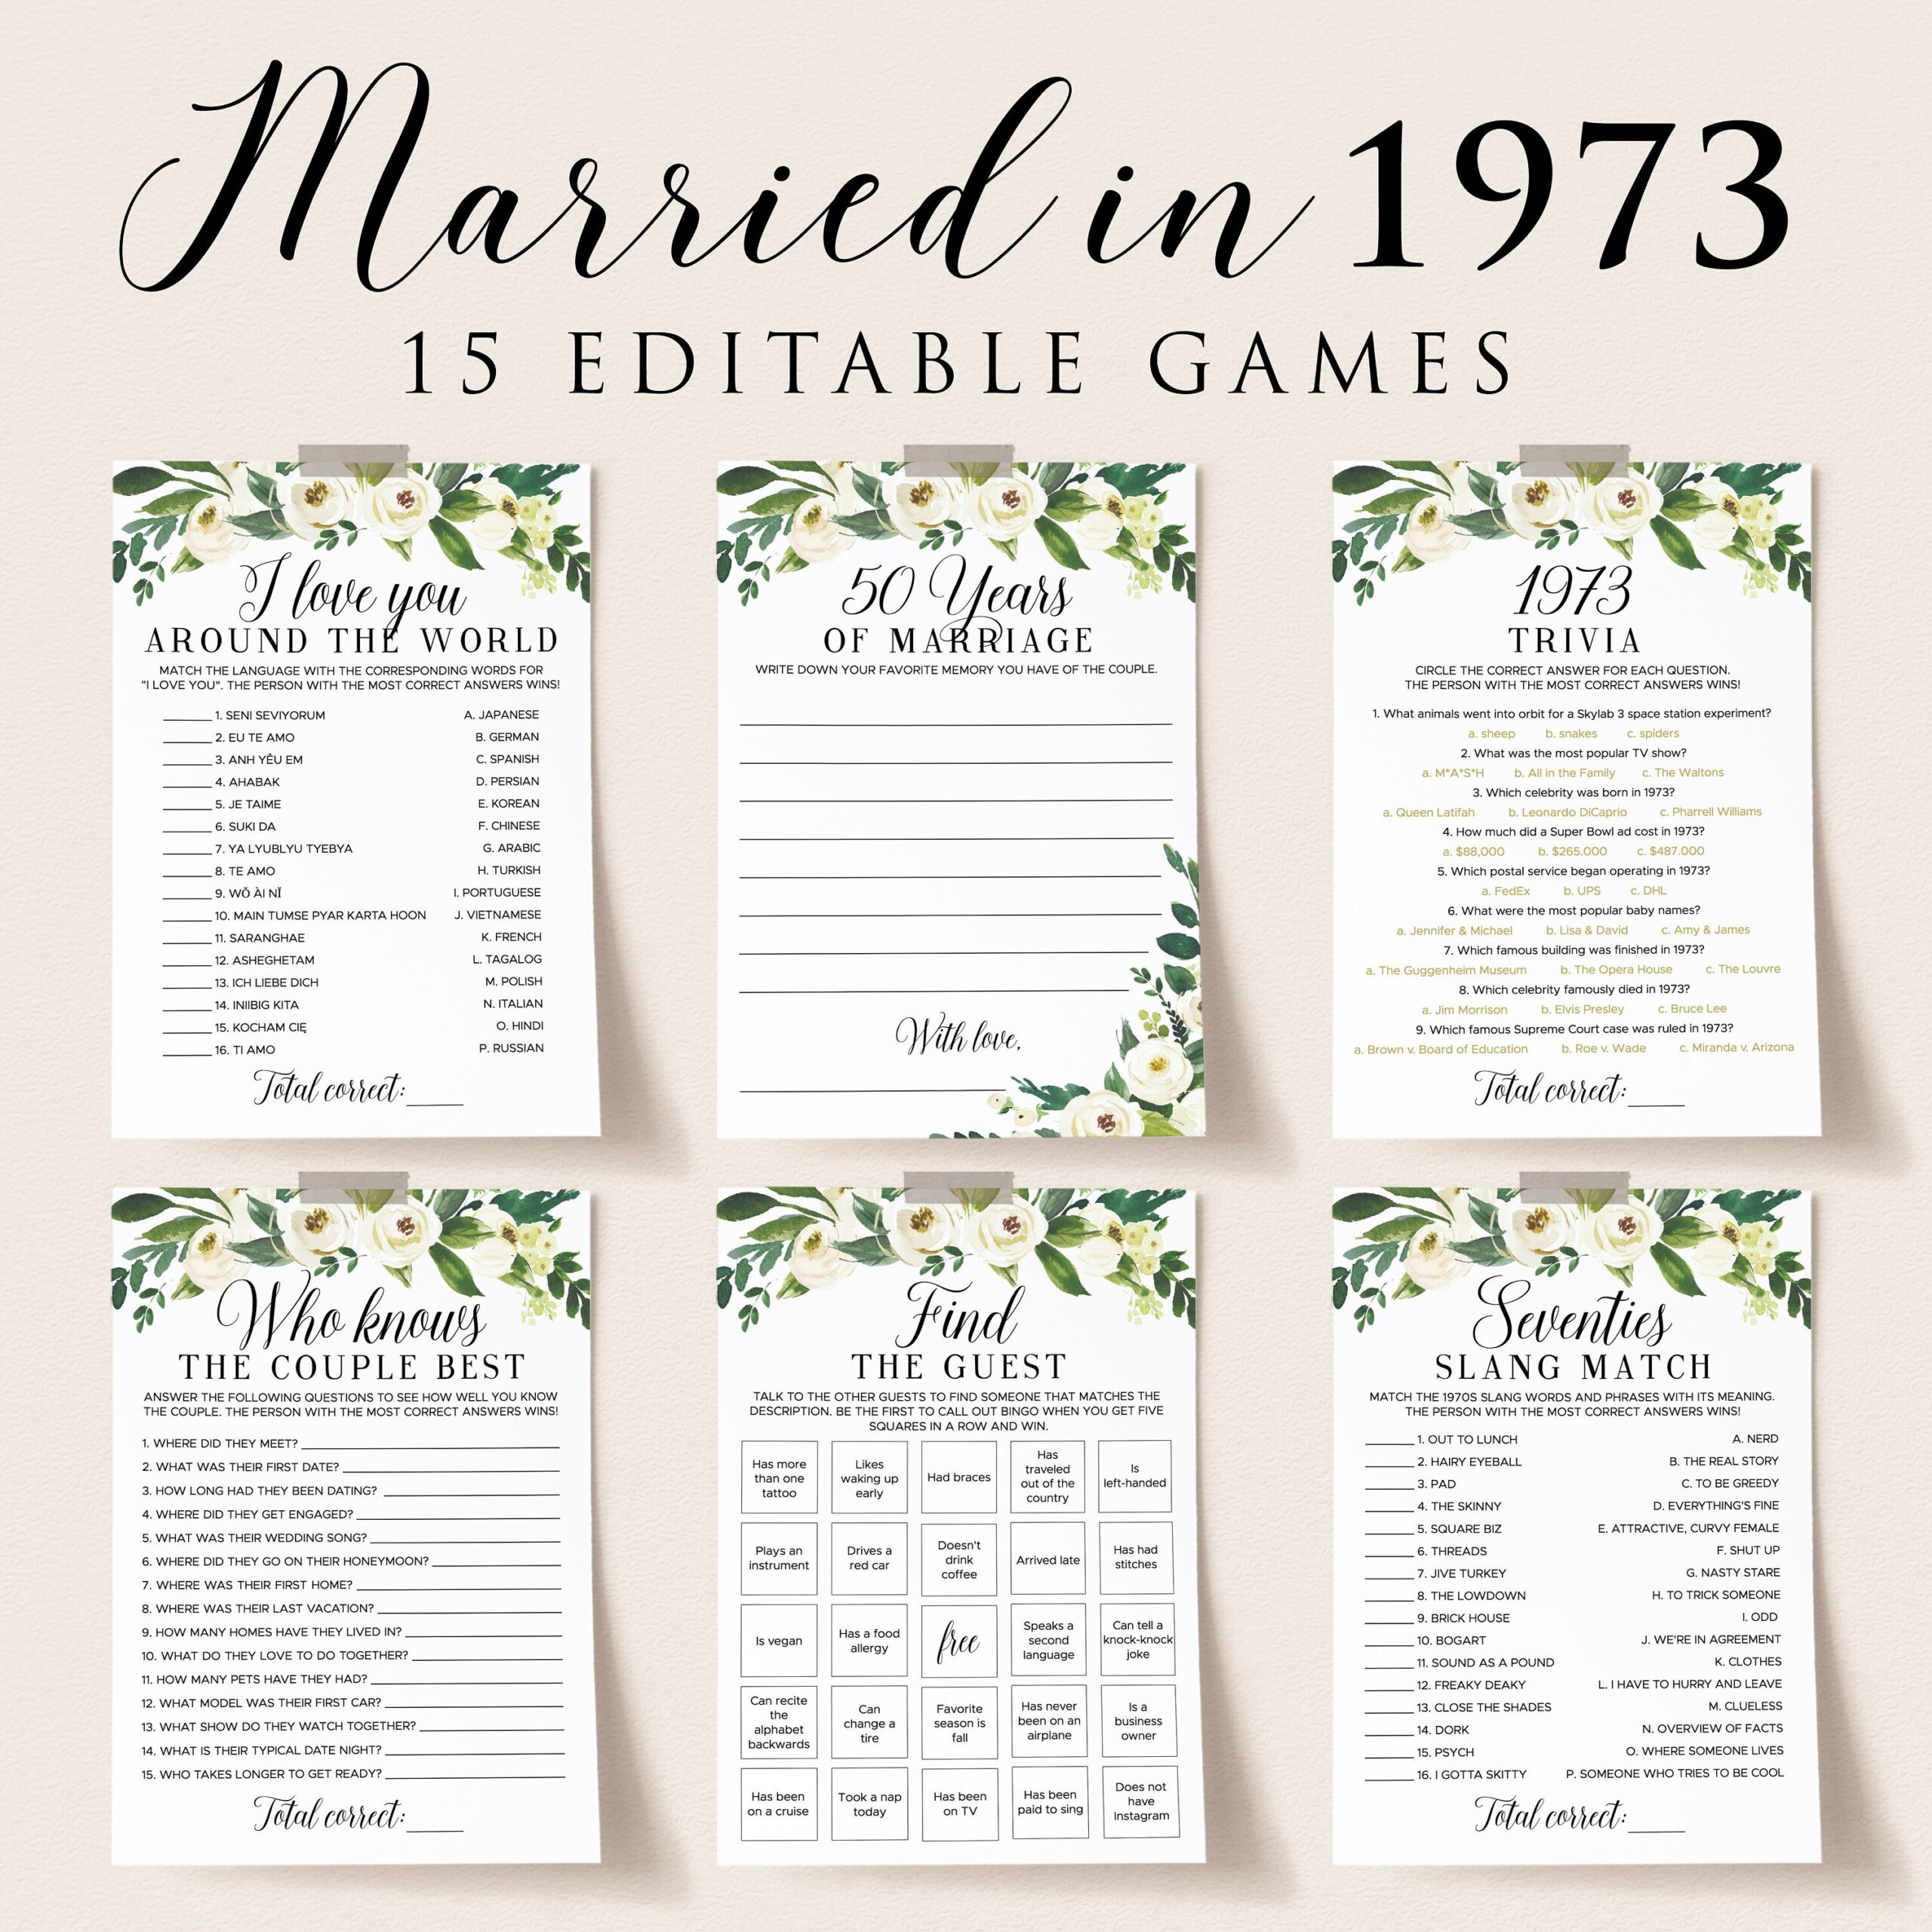 51st Anniversary Party Games Printable Greenery Wedding Anniversary Idea Couple Games For Anniversary Party Married In 1973 Trivia Adult WR1 Etsy